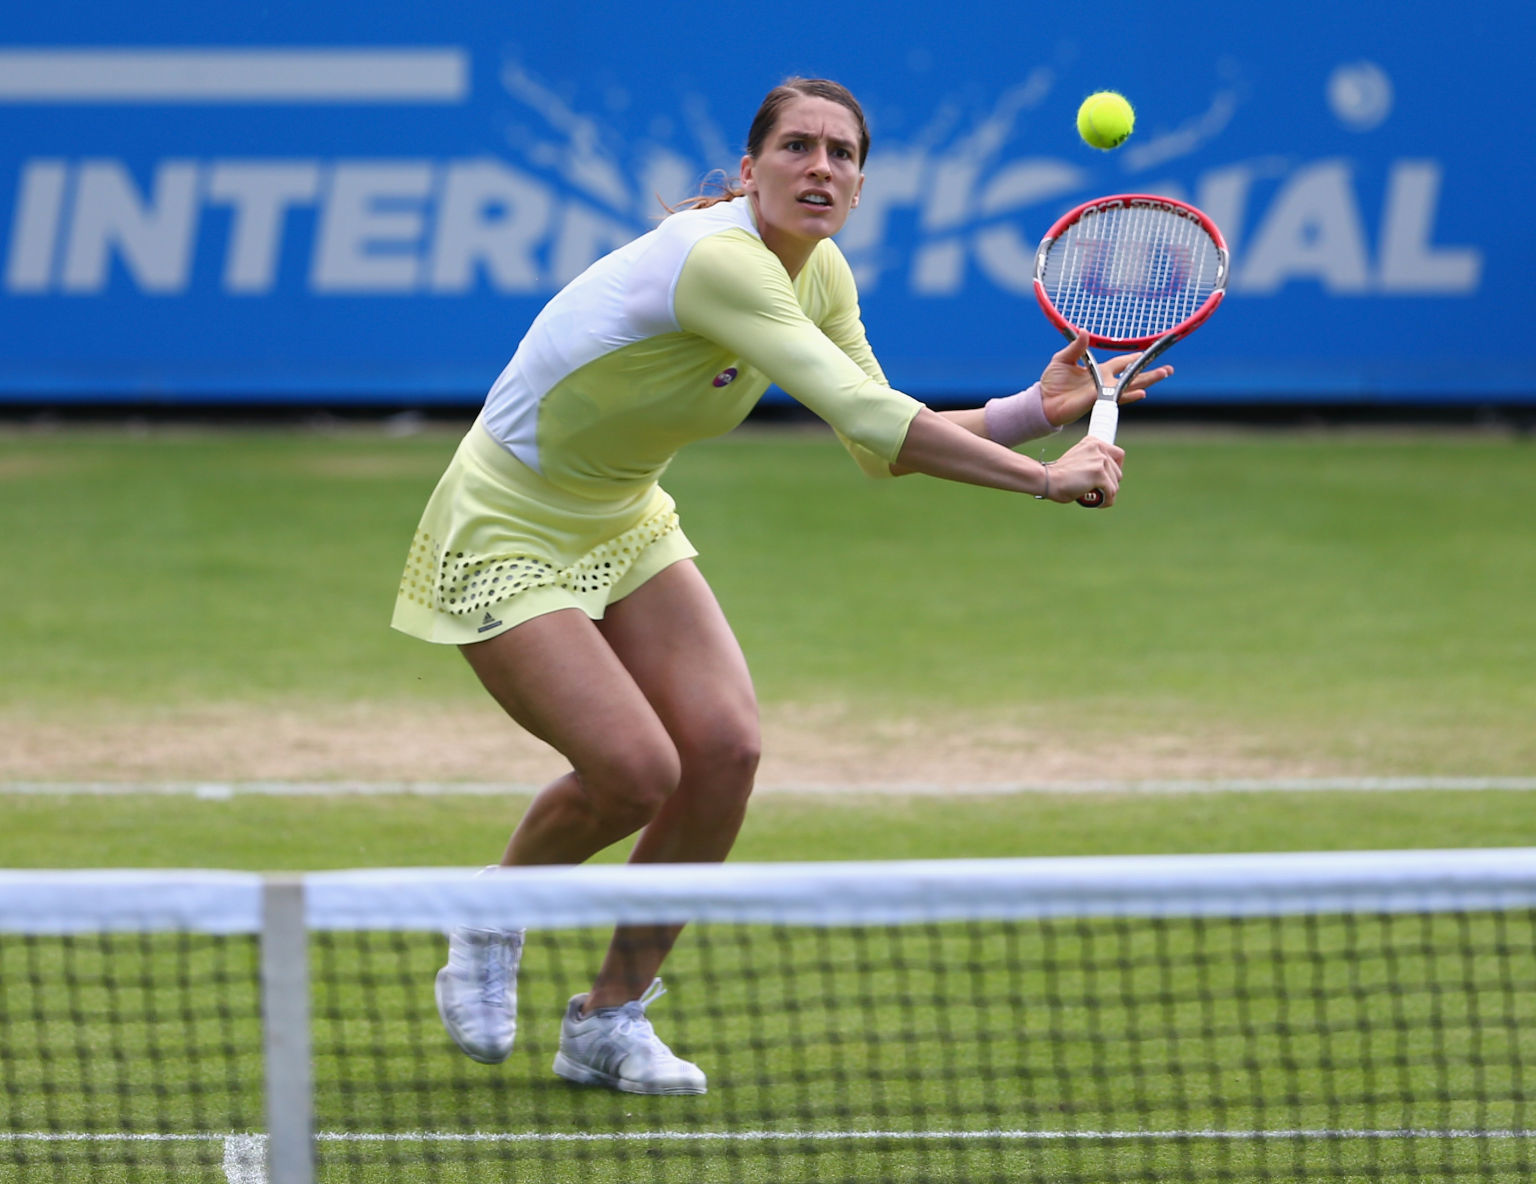 EASTBOURNE, ENGLAND - JUNE 23: Andrea Petkovic of Germany plays a forehand during her third round women's singles match against Ekaterina Makarova of Russia on day five of the WTA Aegon International at Devonshire Park on June 23, 2016 in Eastbourne, England. (Photo by Steve Bardens/Getty Images for LTA)